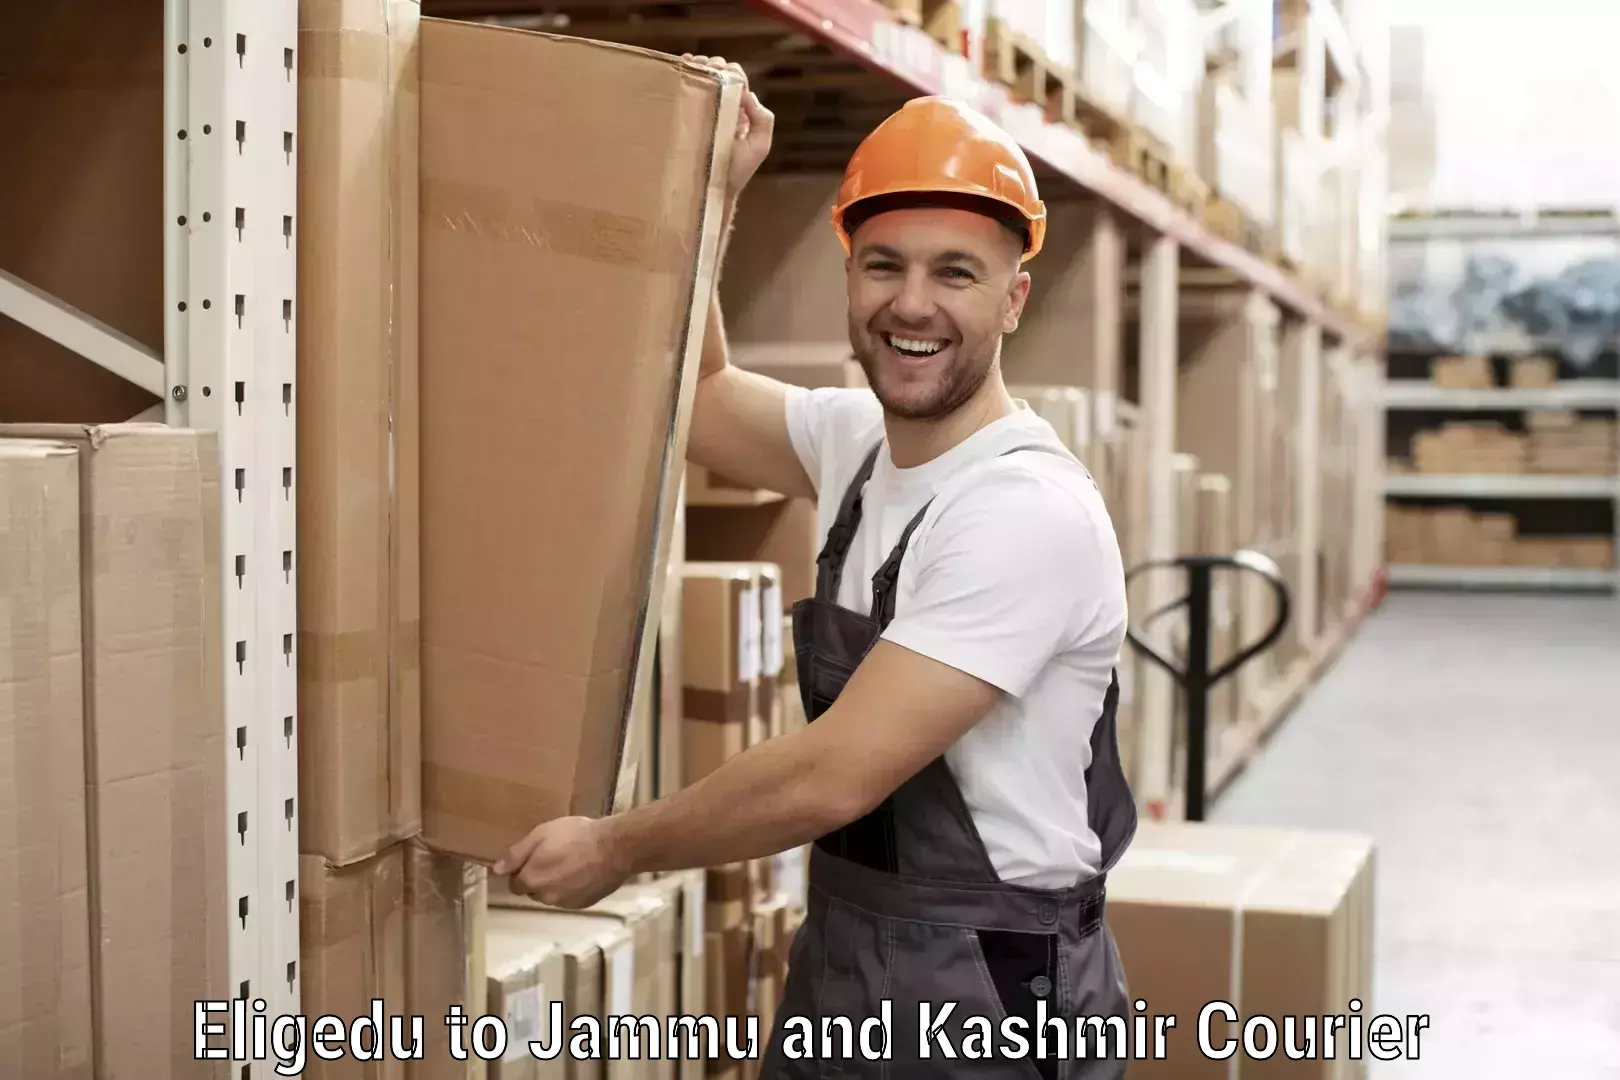 International courier rates Eligedu to Sopore